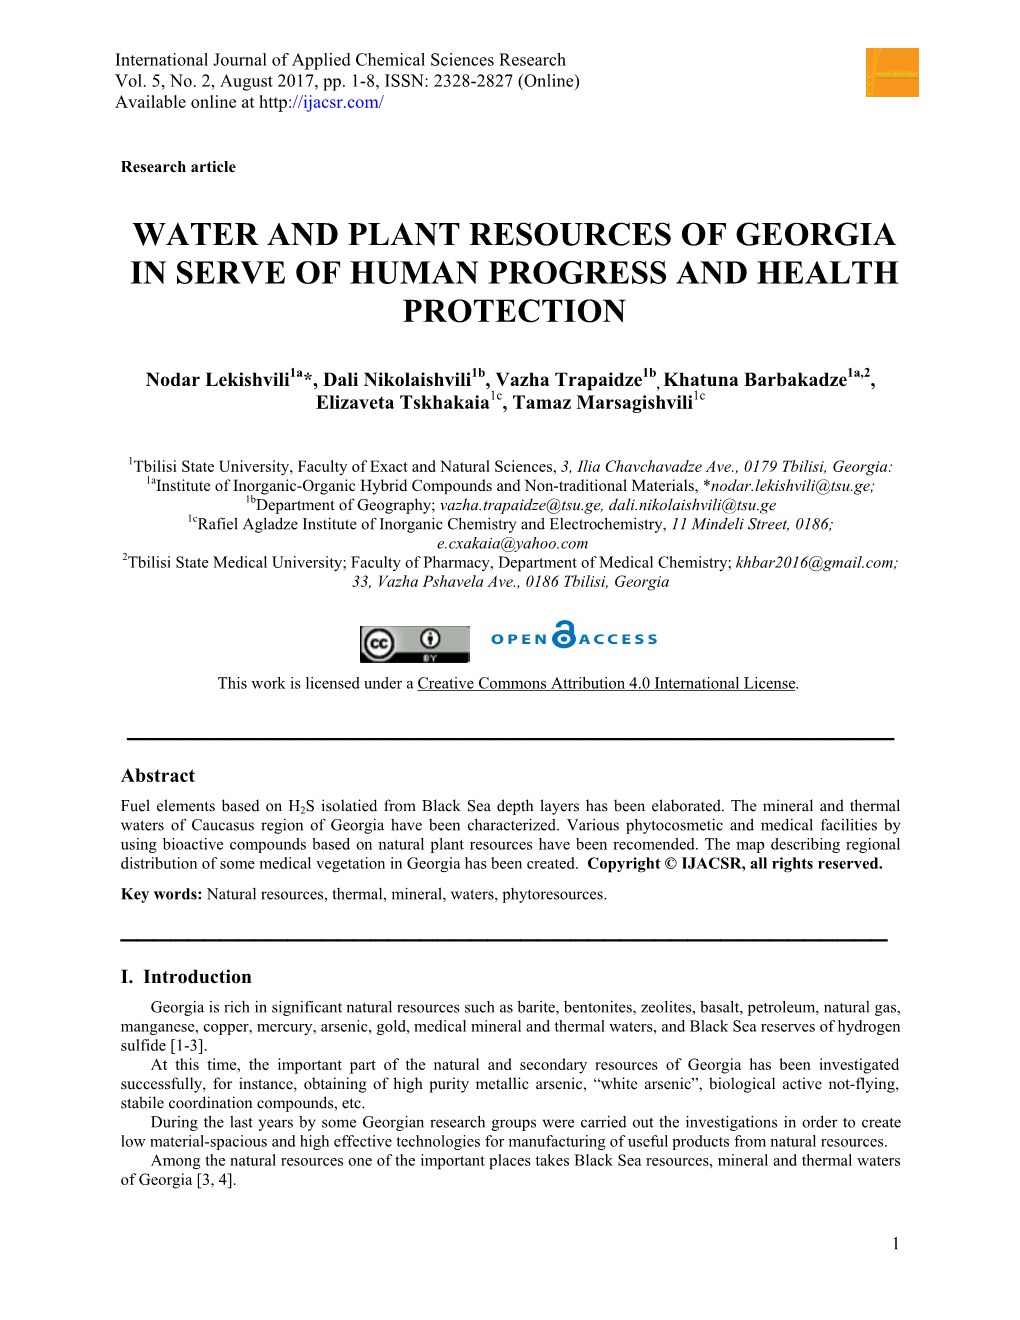 Water and Plant Resources of Georgia in Serve Of